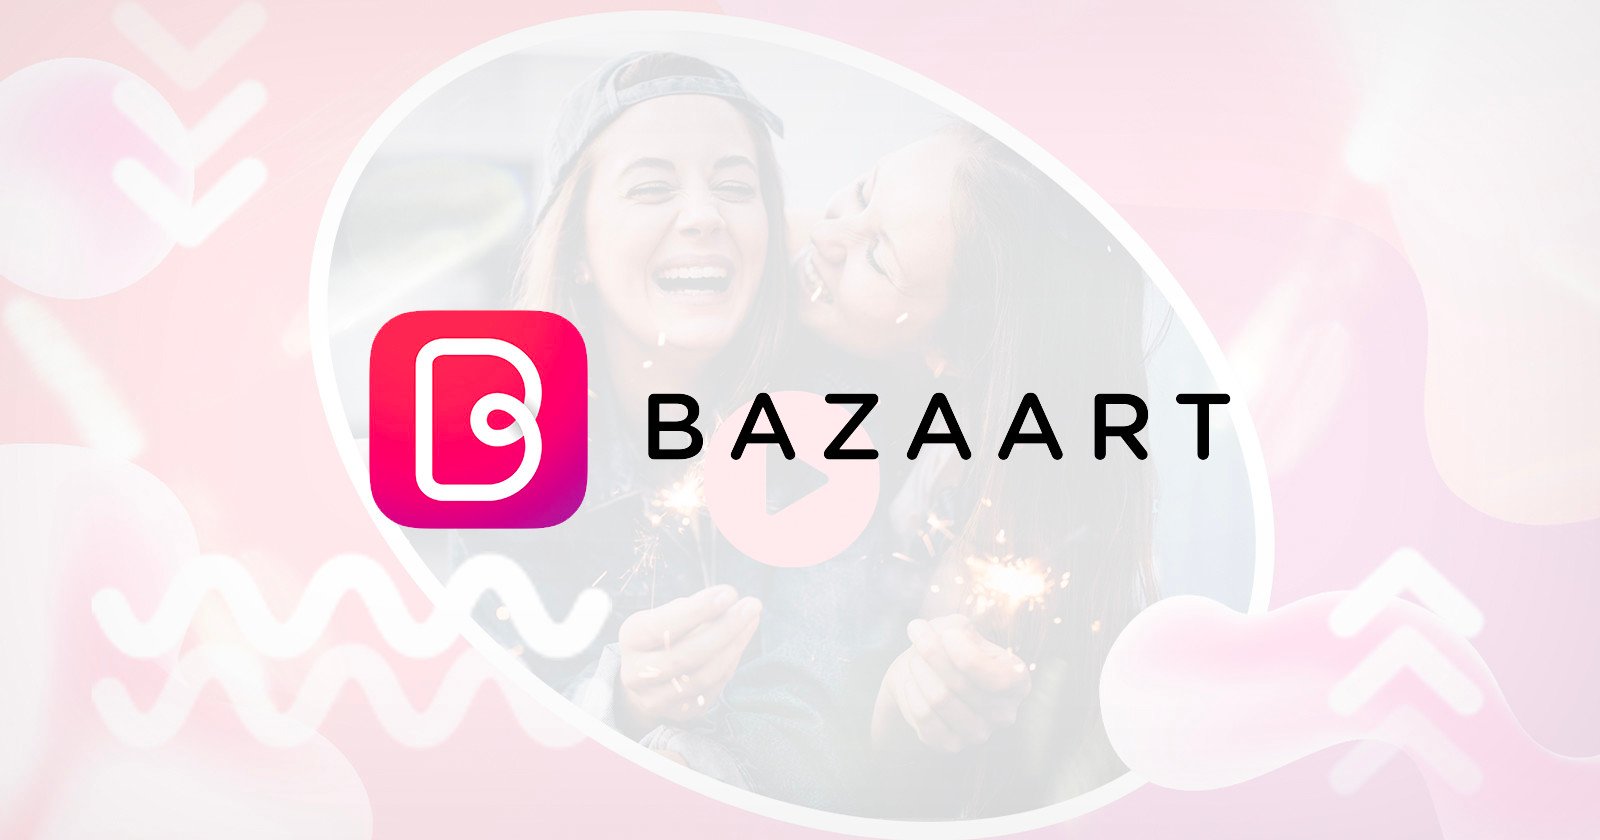 Photo Editing App Bazaart Adds Video to Keep Up with Picsart